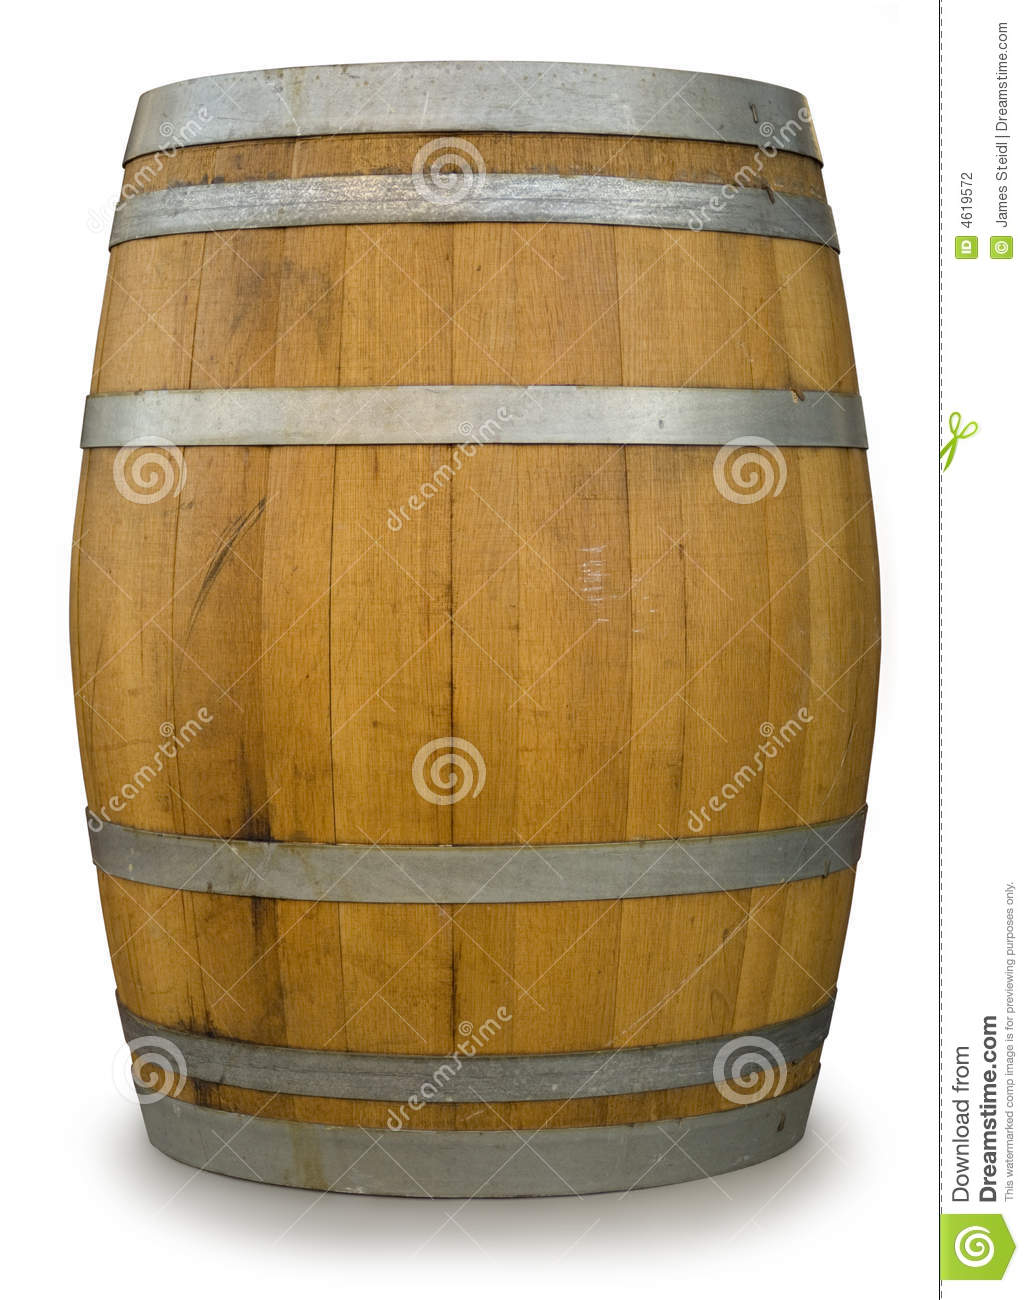 Oak Barrel Isolated On White With A Clipping Path